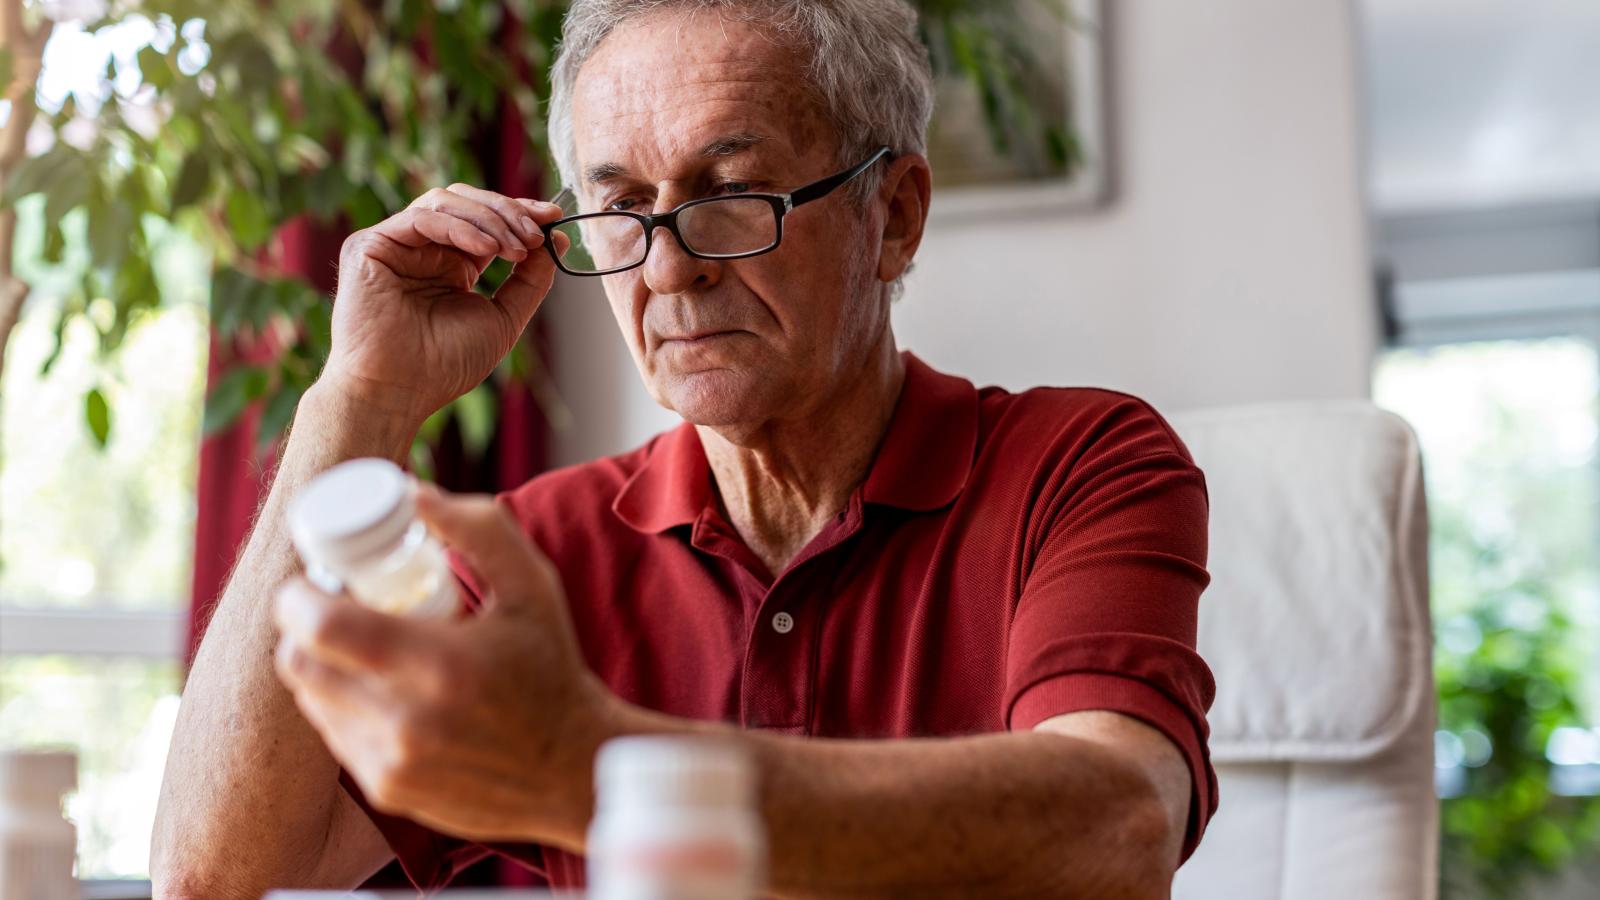 A man in his sixties wearing glasses carefully examining the label on a medicine bottle